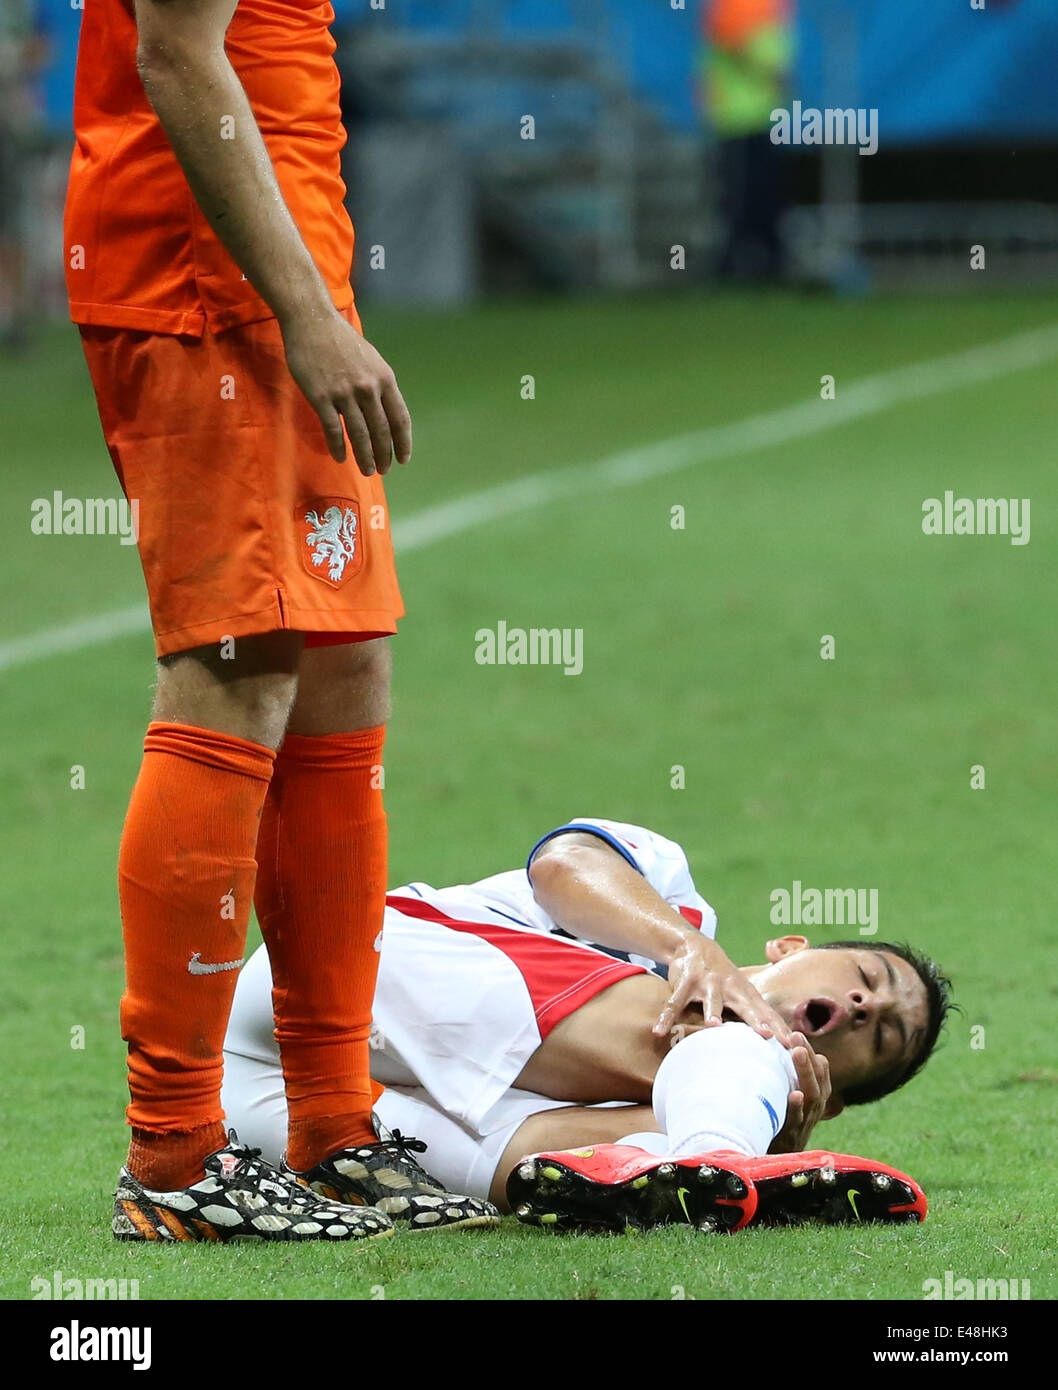 Salvador, Brazil. 5th July, 2014. Costa Rica's Christian Gamboa (R) falls down during a quarter-finals match between Netherlands and Costa Rica of 2014 FIFA World Cup at the Arena Fonte Nova Stadium in Salvador, Brazil, on July 5, 2014. Credit:  Cao Can/Xinhua/Alamy Live News Stock Photo